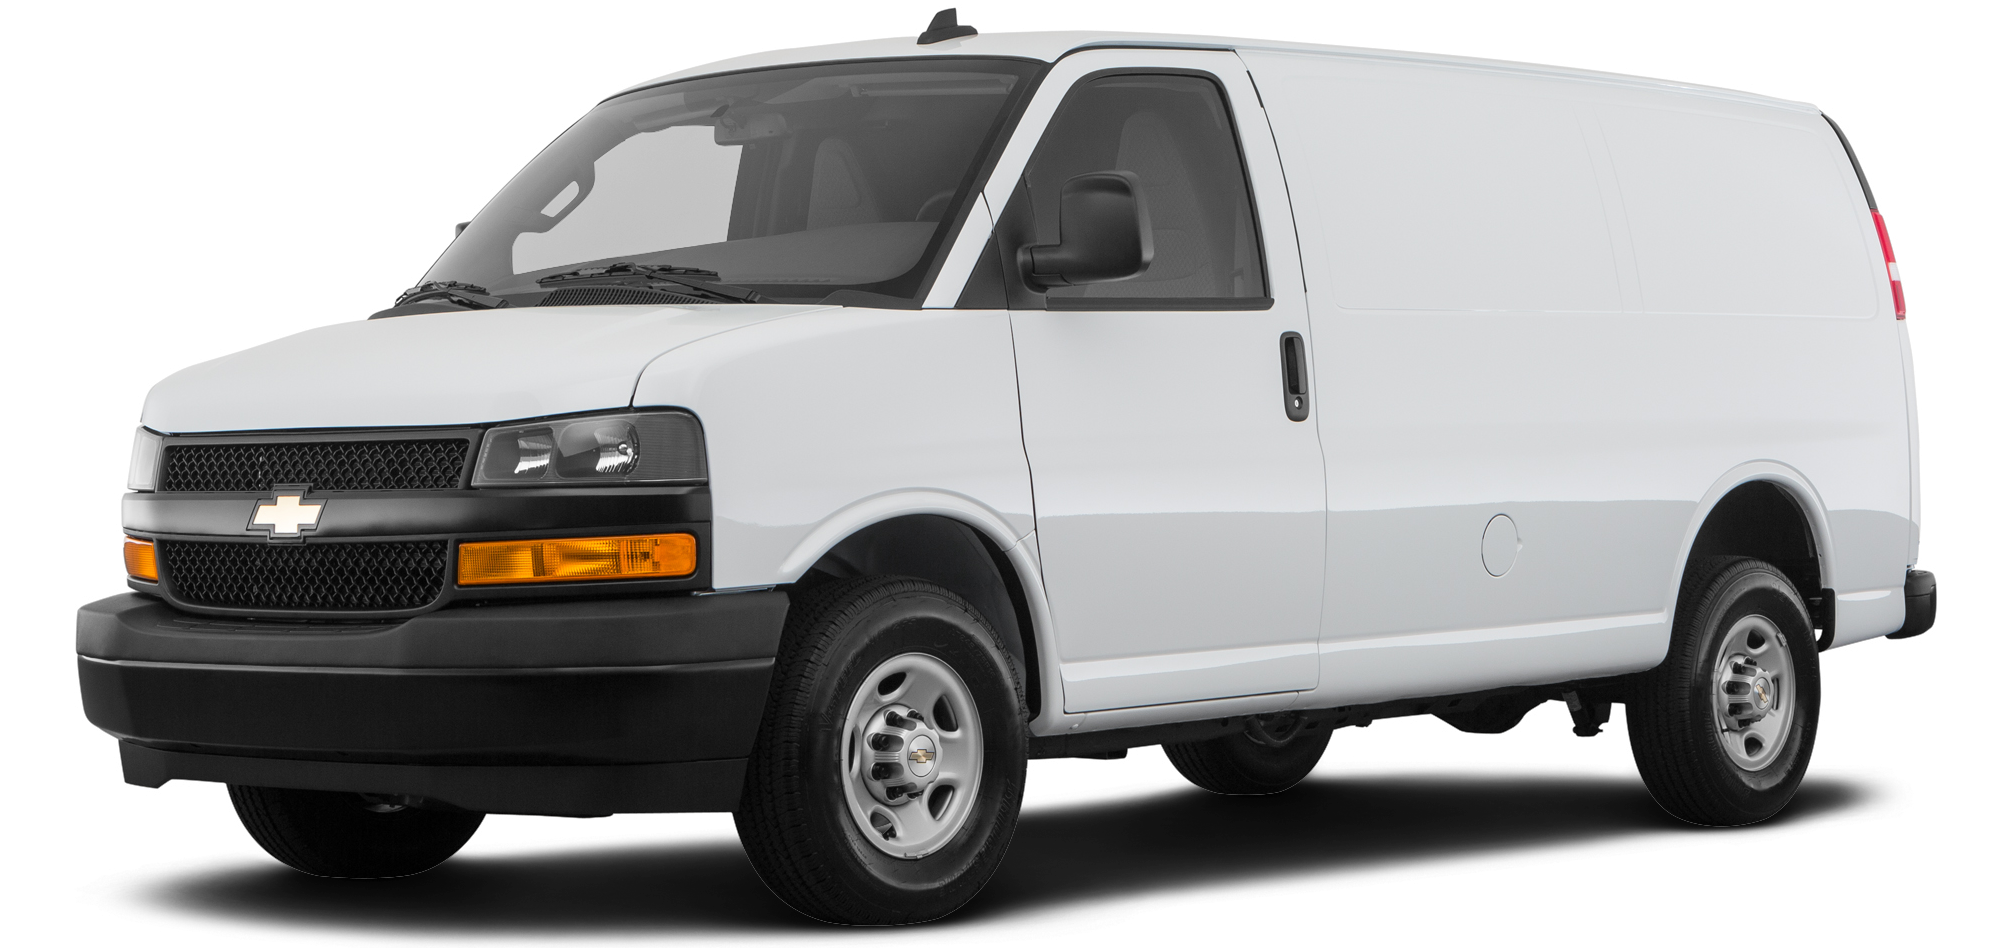 2019 Chevrolet Express 2500 Incentives, Specials & Offers in ESCANABA MI